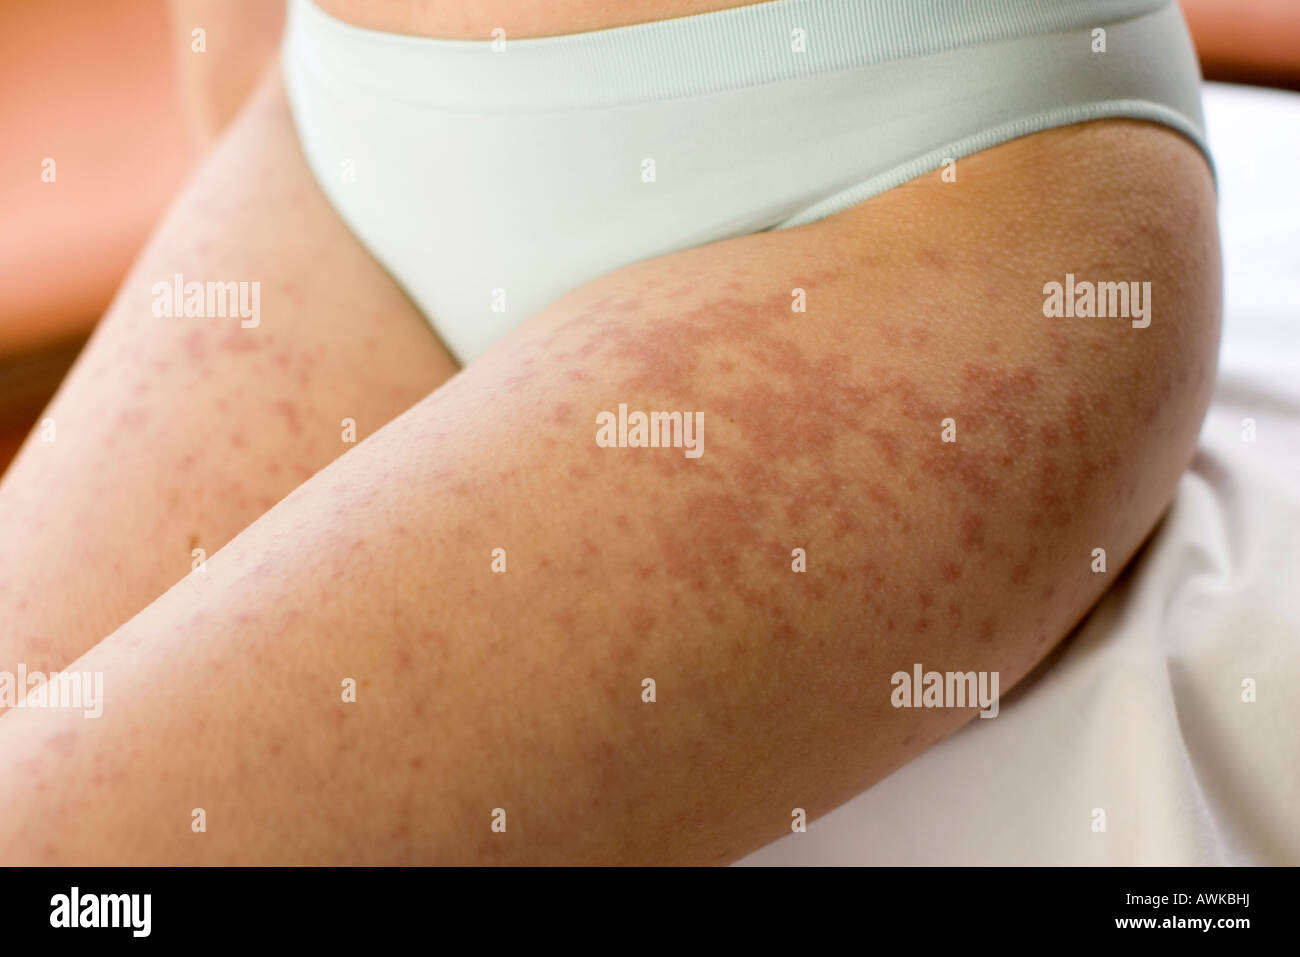 woman with rash on her legs Stock Photo